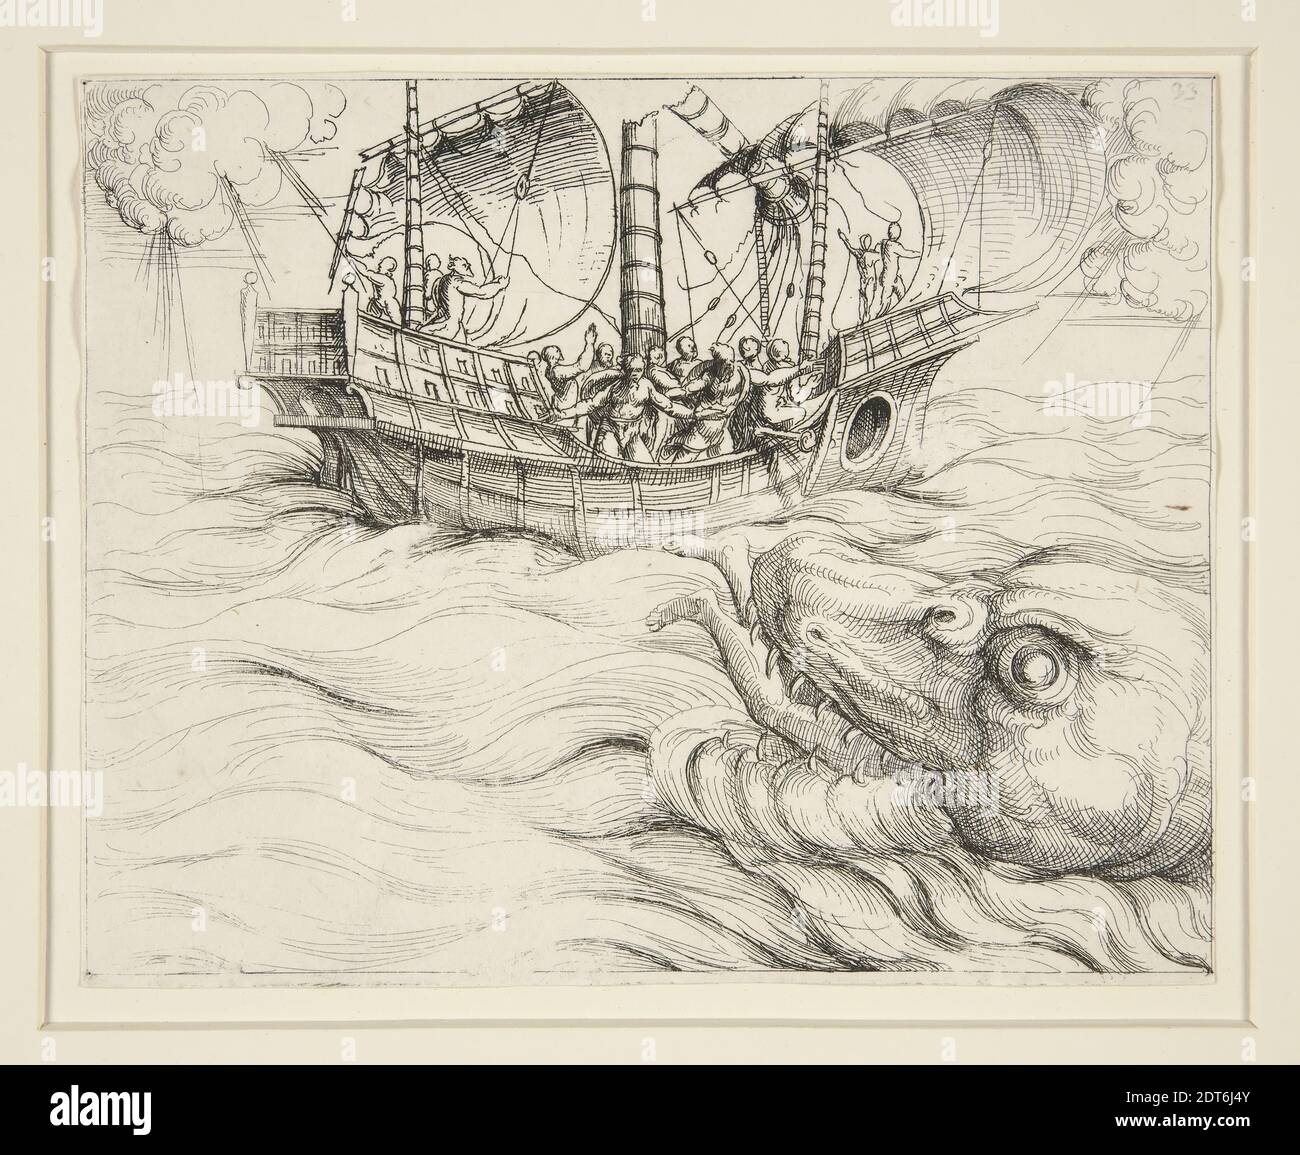 Artist: Augustin Hirschvogel, German, 1503–1553, Jonah swallowed by the Whale, Etching, sheet: 11.4 × 14.5 cm (4 1/2 × 5 11/16 in.), 16th century, Works on Paper - Prints Stock Photo